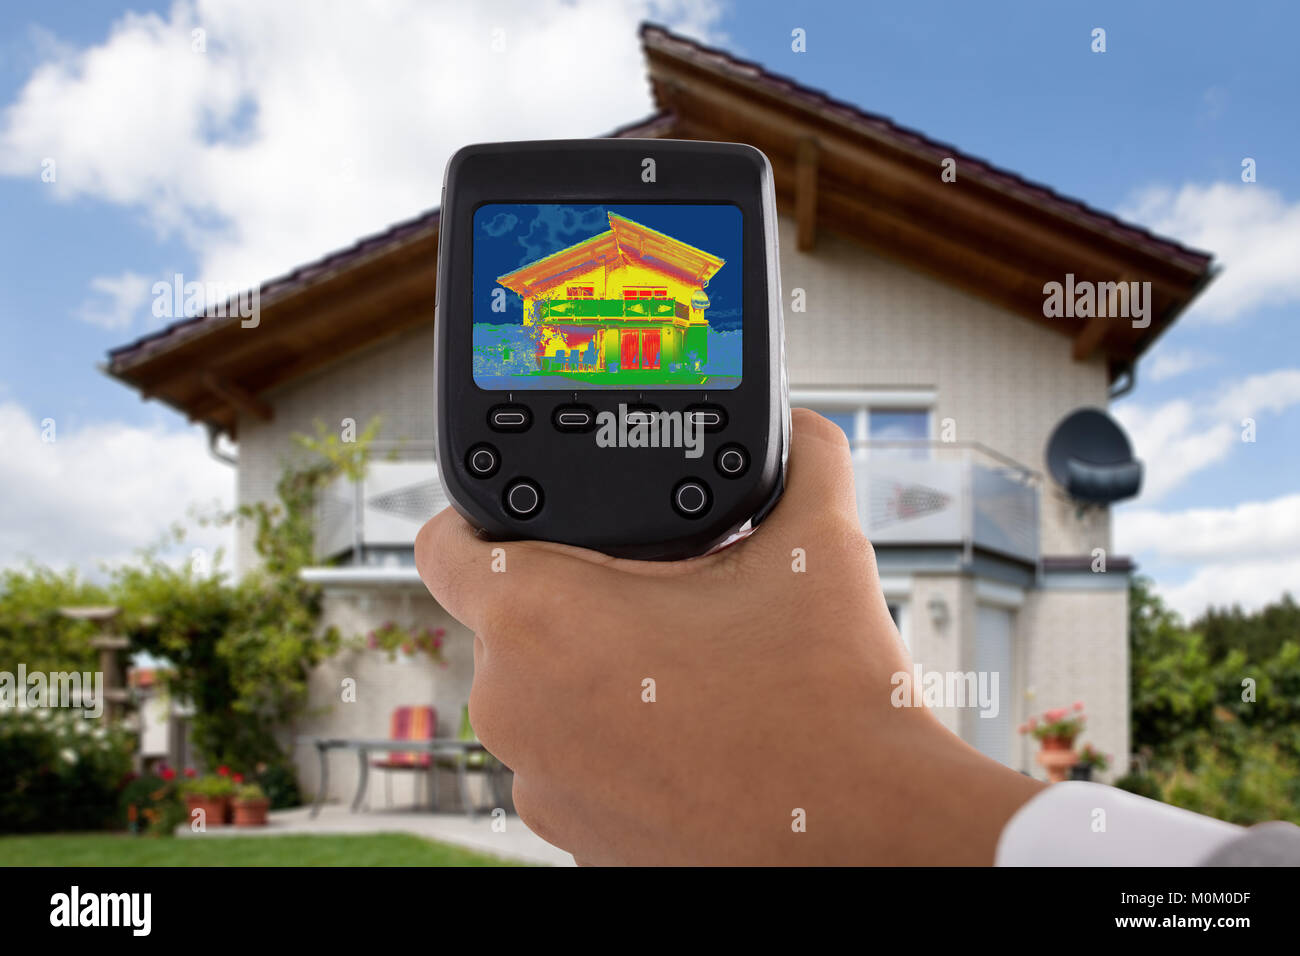 https://c8.alamy.com/comp/M0M0DF/close-up-of-person-detecting-heat-loss-outside-house-using-infrared-M0M0DF.jpg